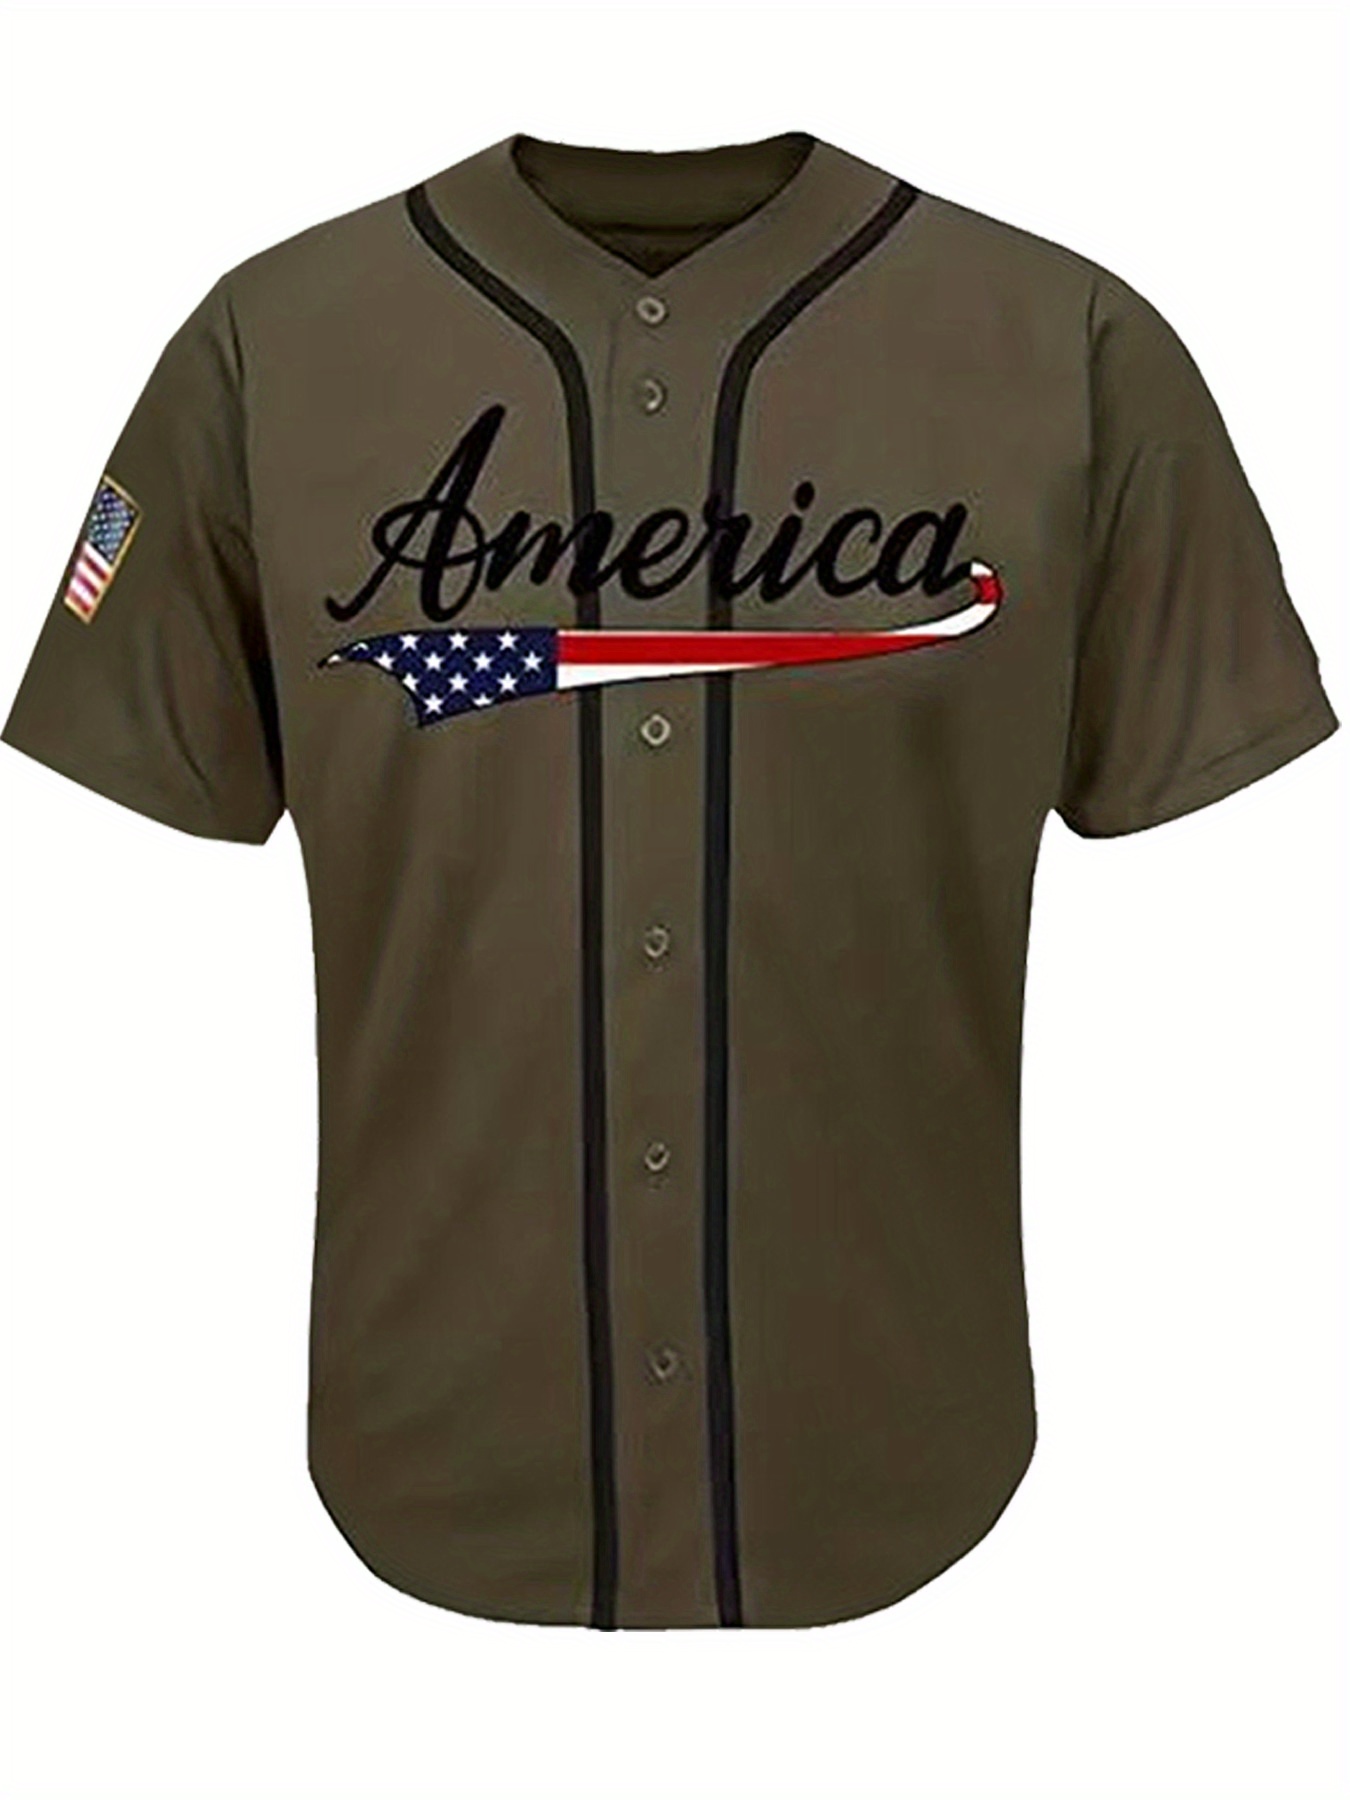 Men's #1 Baseball Jersey, Casual Short Sleeve Button Up Embroidery